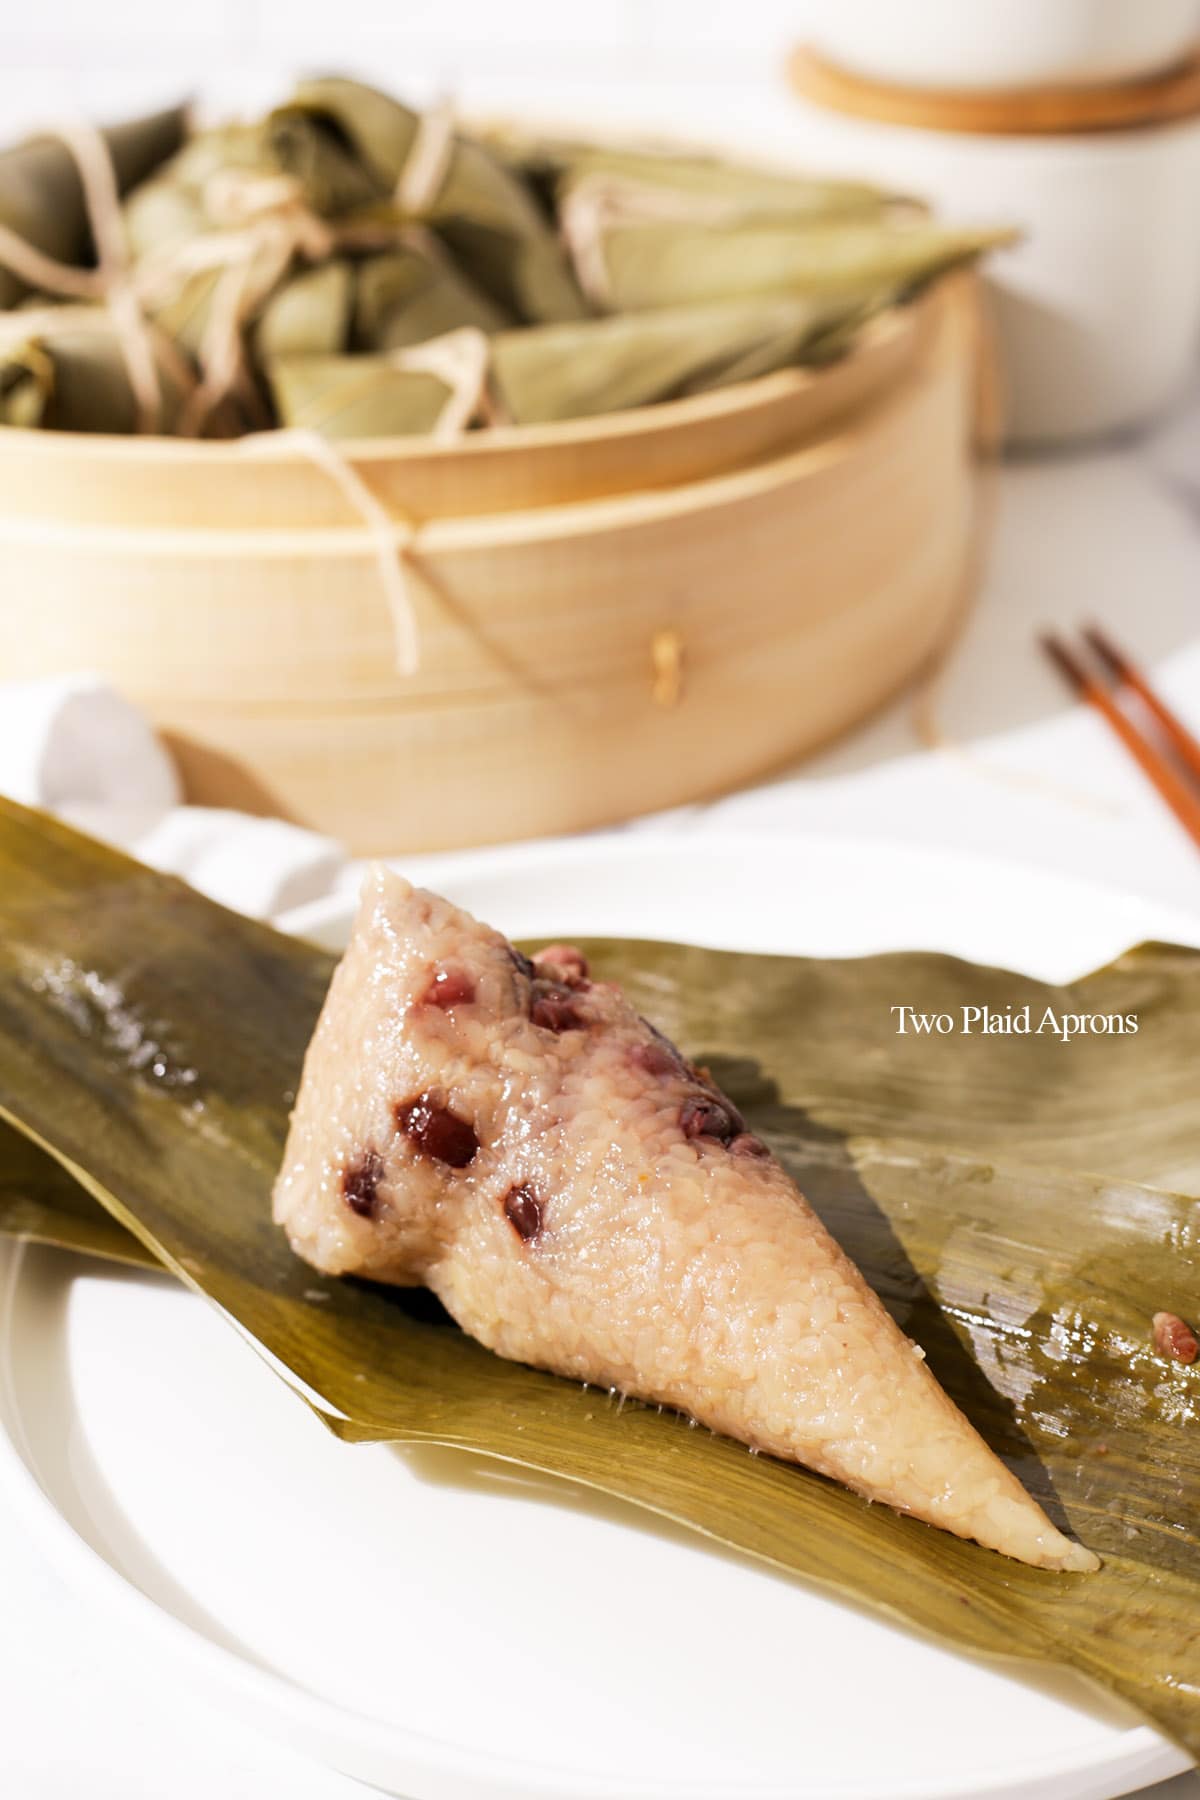 Zongzi with red beans on plate unwrapped.